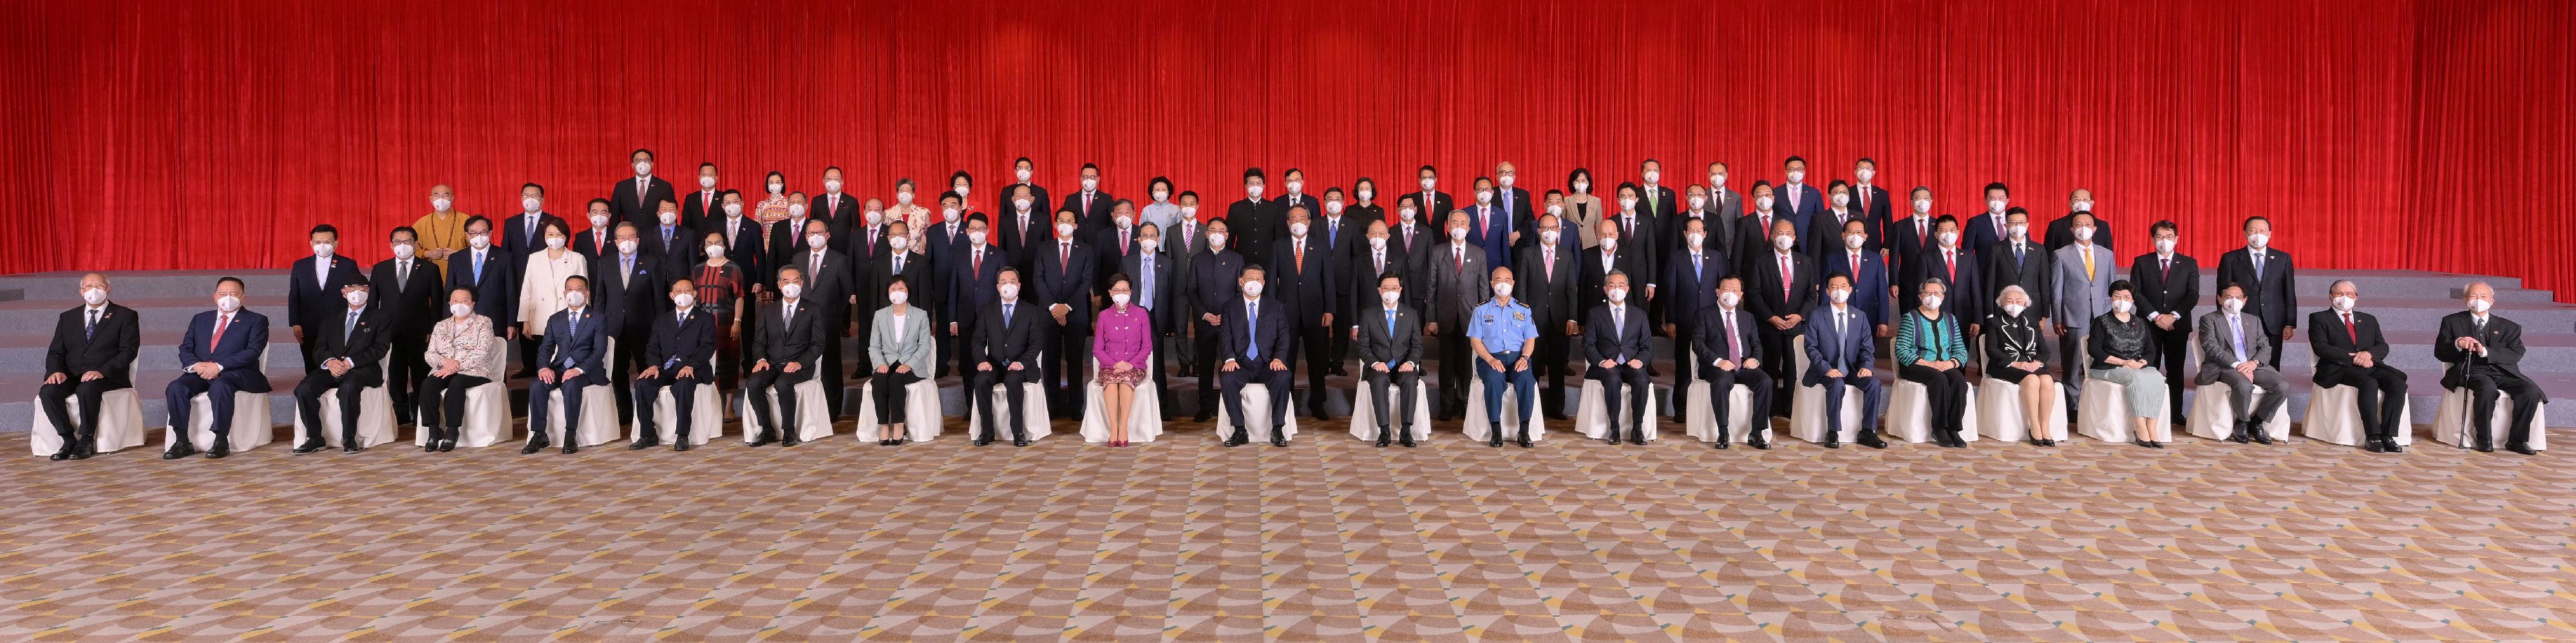 President Xi Jinping (front row, 11th left); the Chief Executive, Mrs Carrie Lam (front row, 10th left); and the Chief Executive-elect, Mr John Lee (front row, 12th left), in a group photo with people from various sectors of Hong Kong at the Hong Kong Convention and Exhibition Centre this afternoon (June 30).